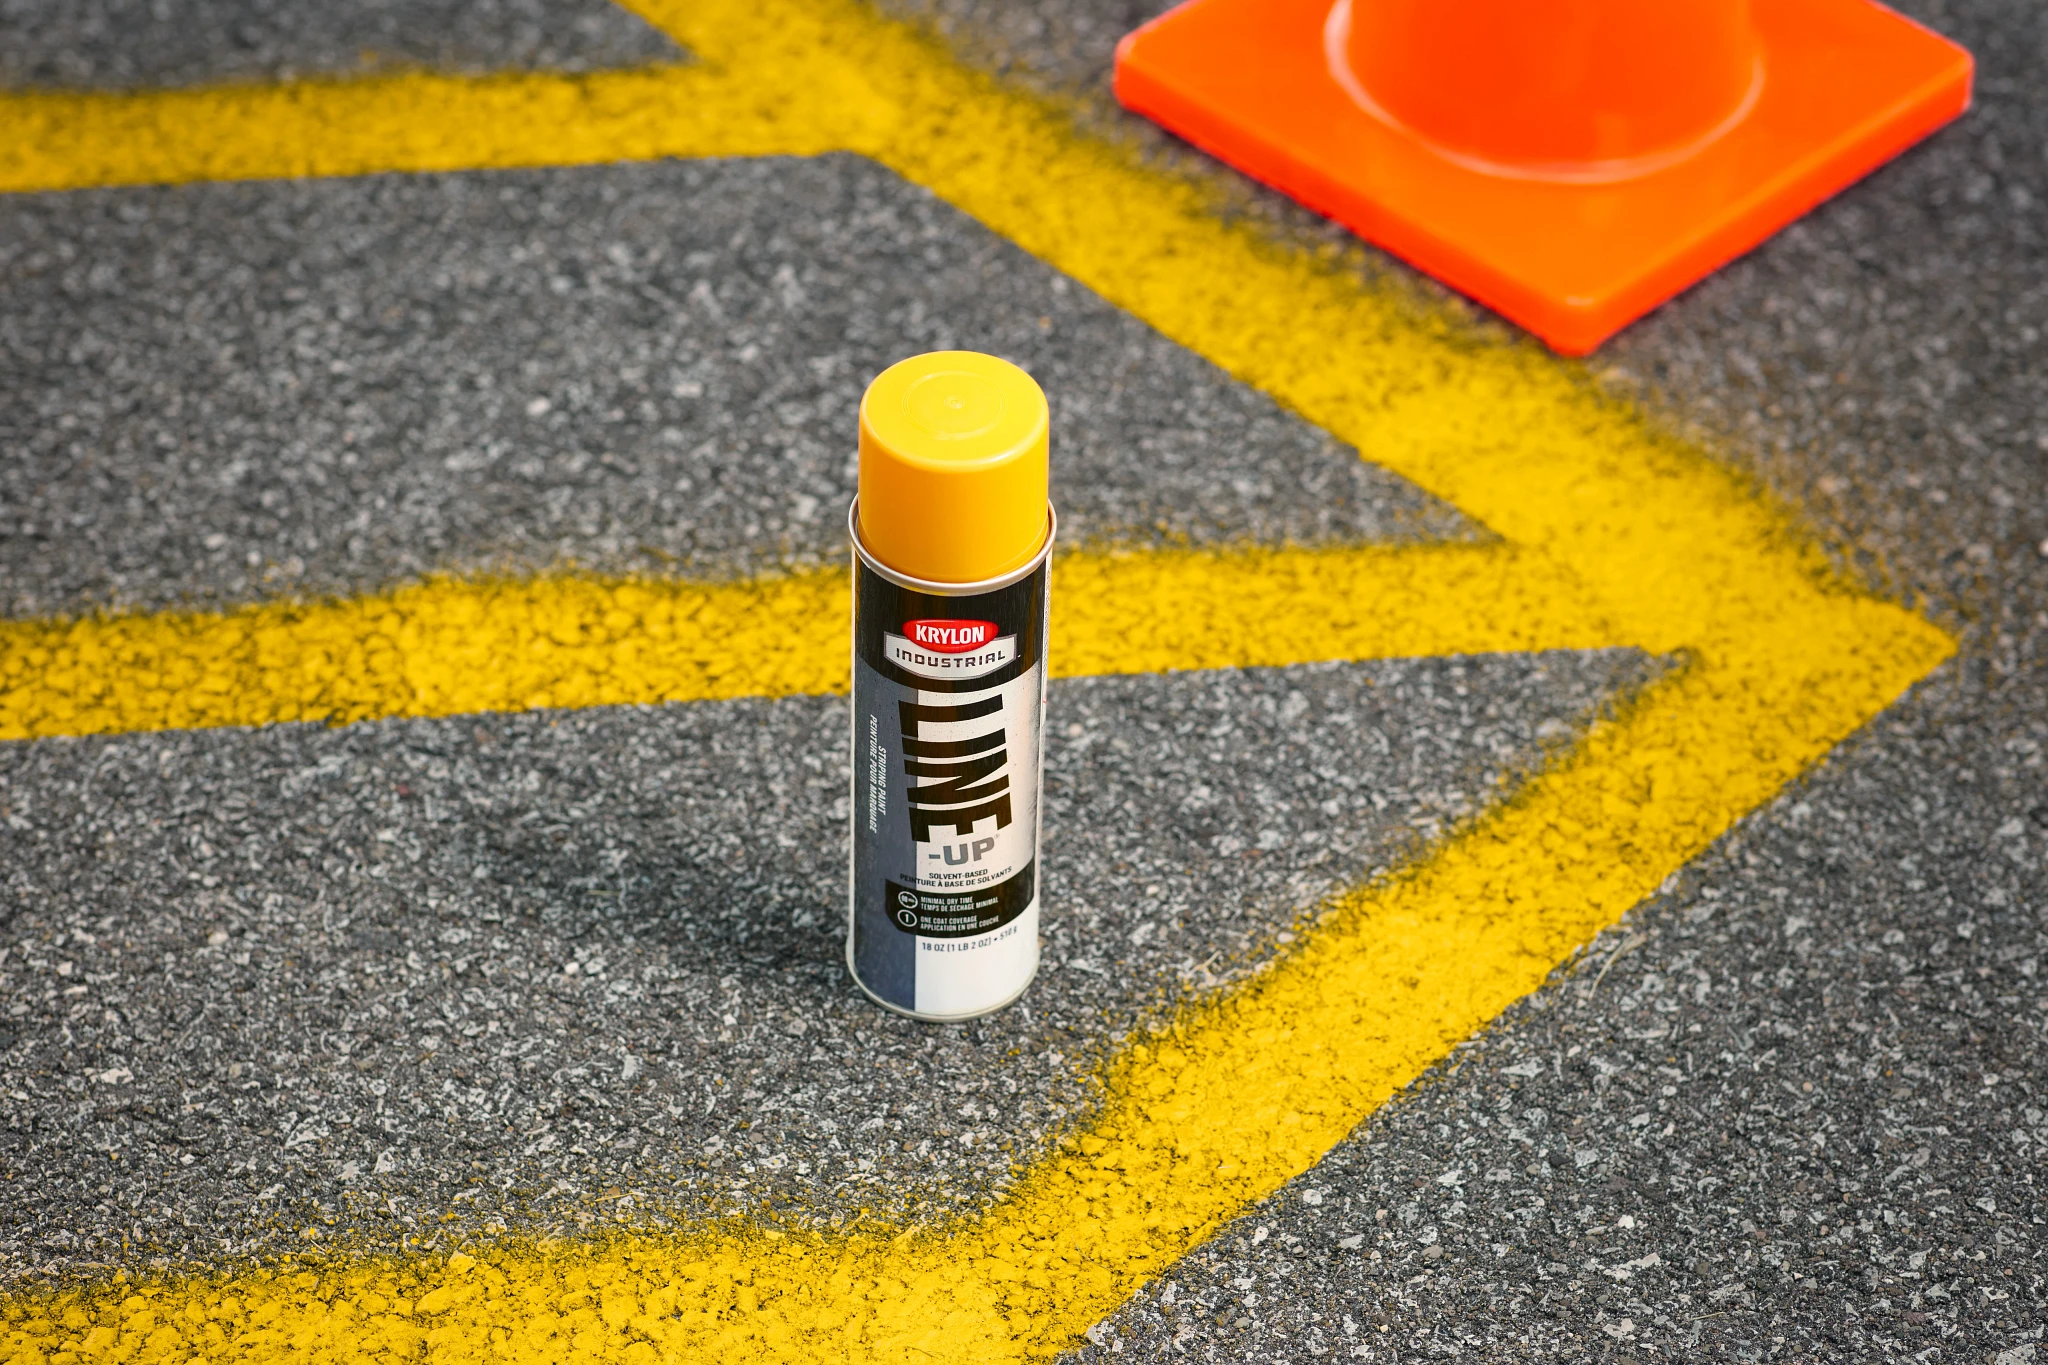 Marking Paint and Striping Paint